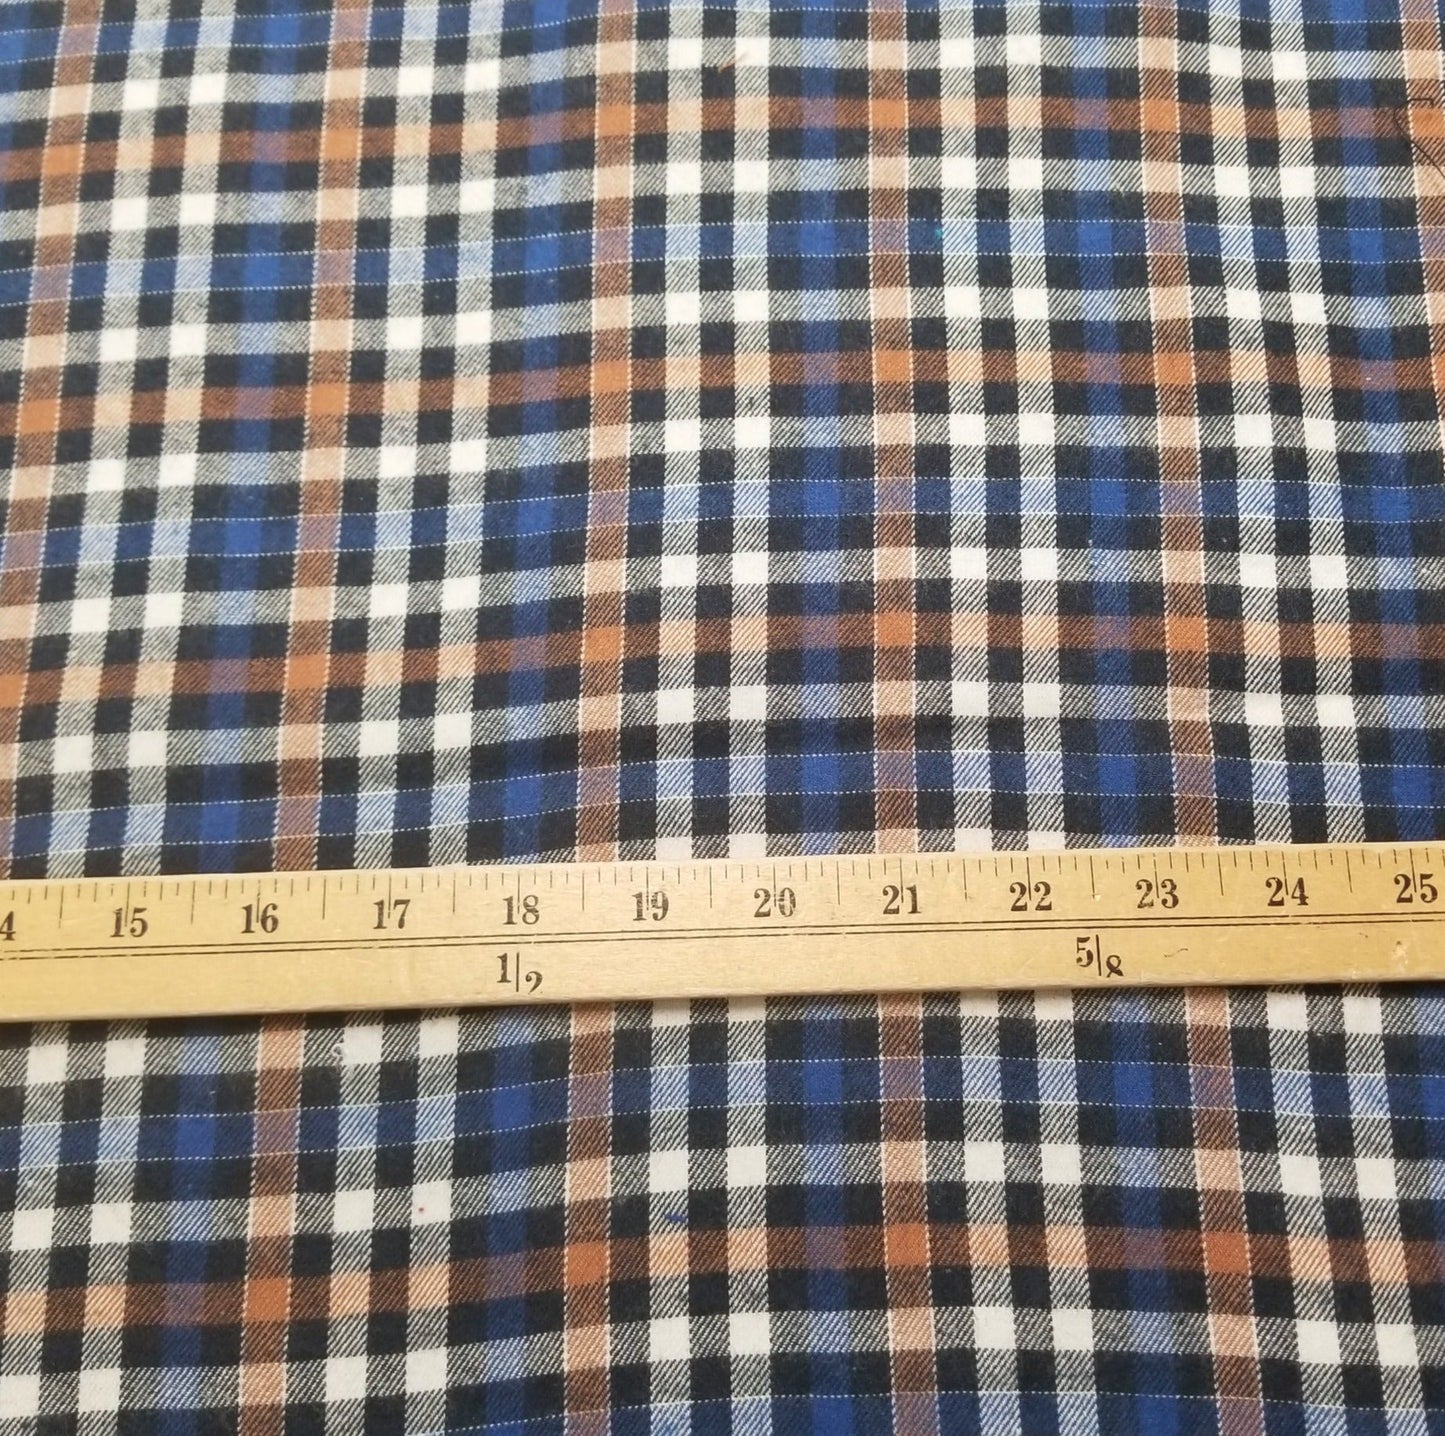 End of Bolt: 2-7/8th yards of  Deadstock Yarn Dyed Single Brushed Flannel Pomona Orange Check Plaid Shirting Cotton Woven-Remnant